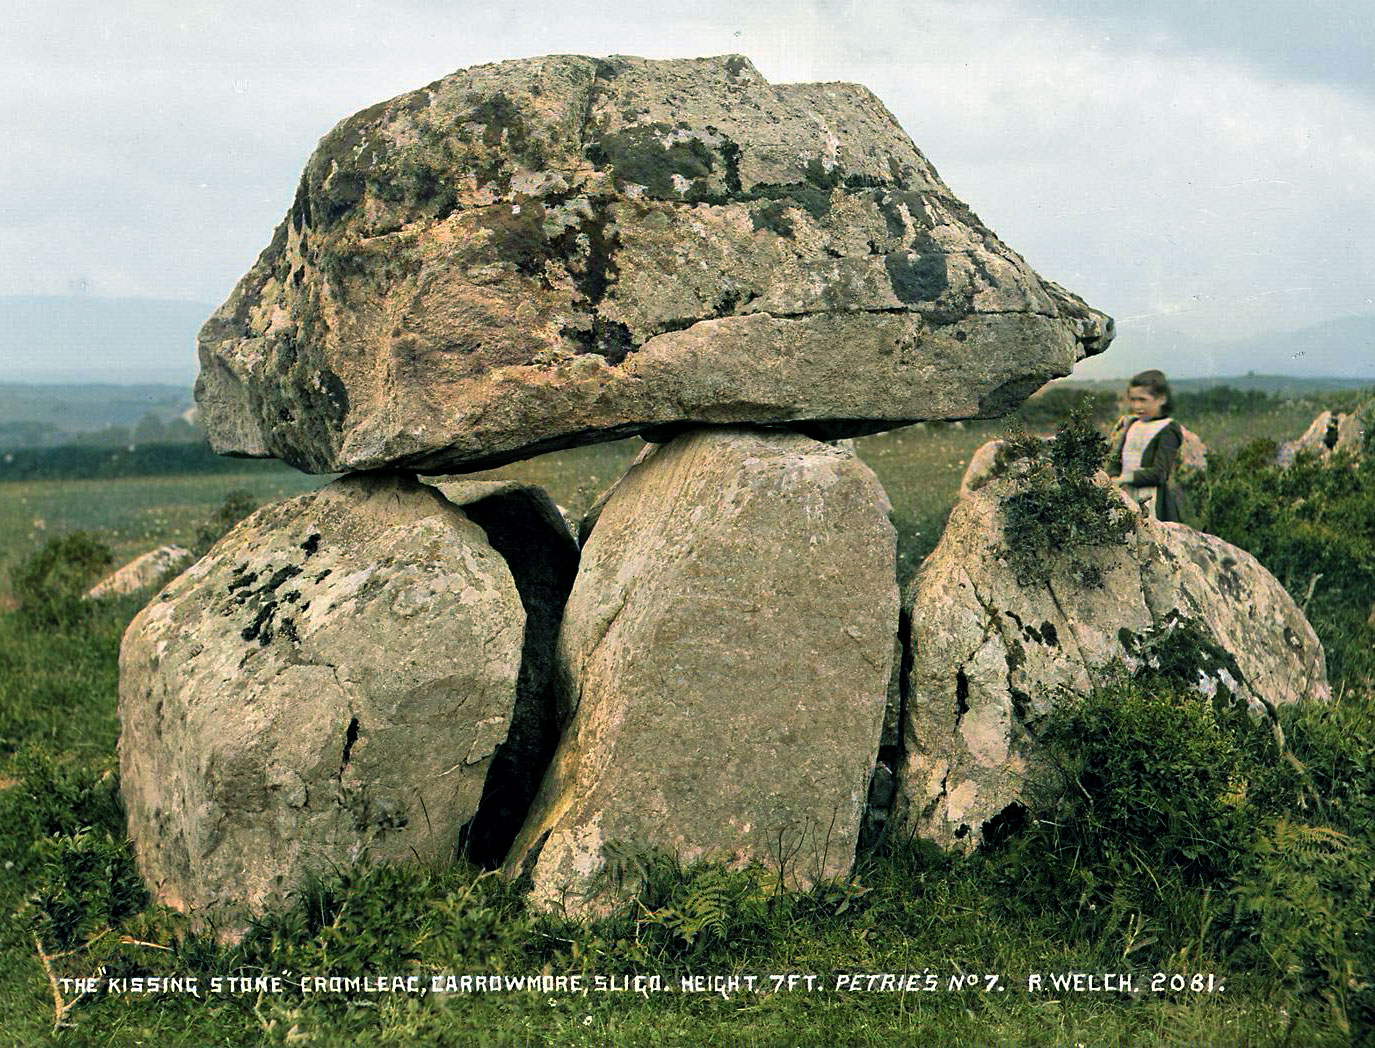 Early photograph of Carrowmore 7 by R. Welch.

